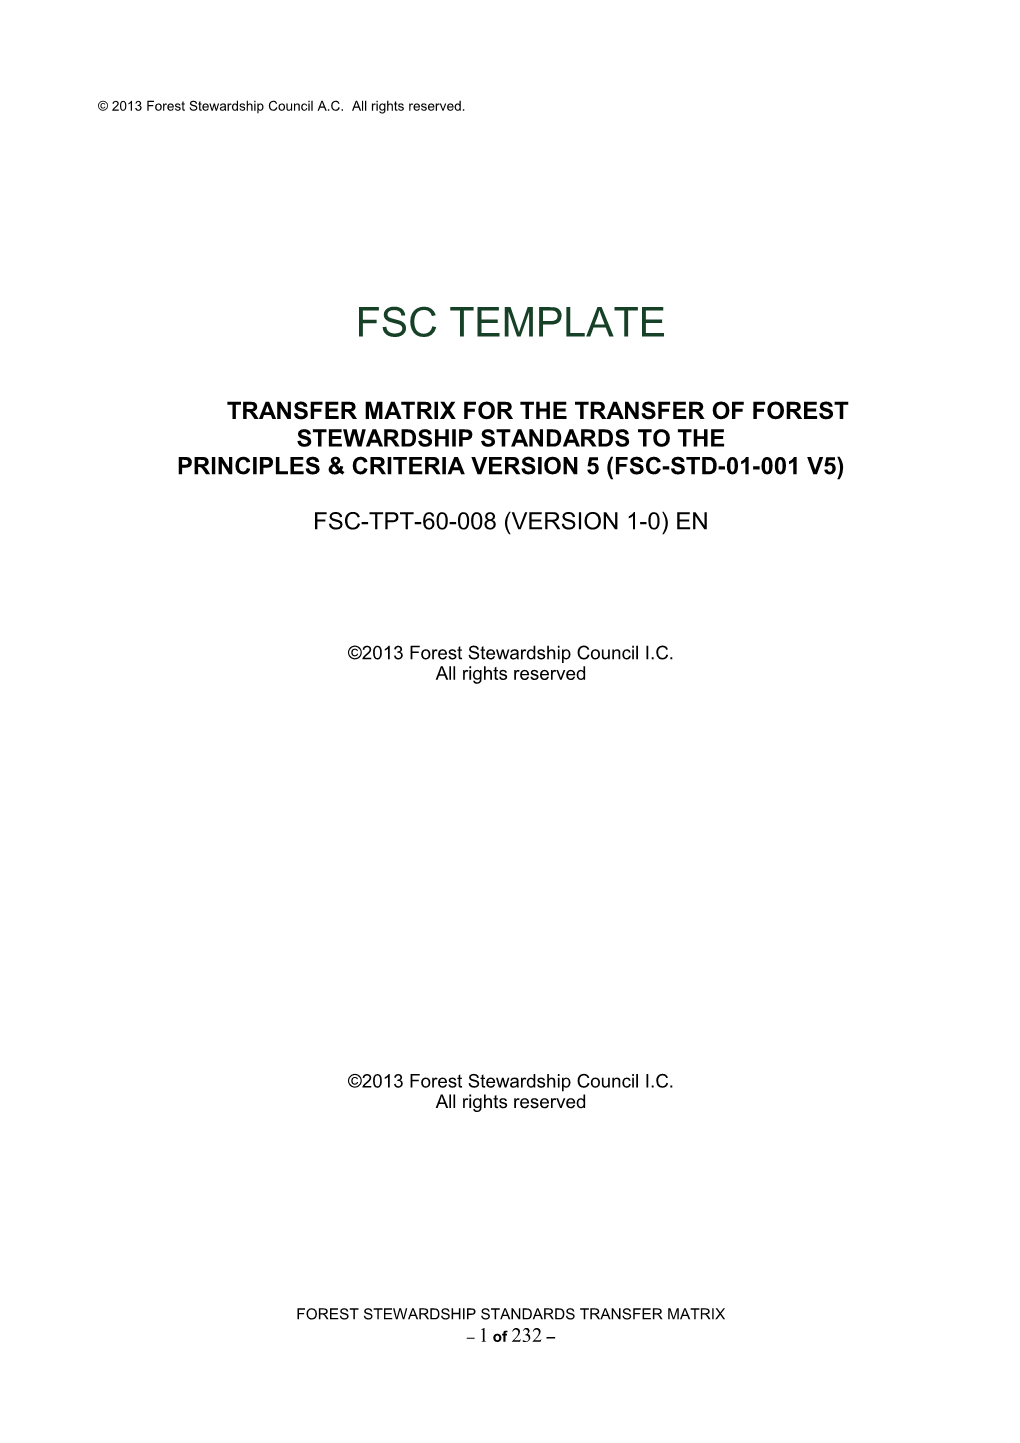 Transfer Matrix for the Transfer of Forest